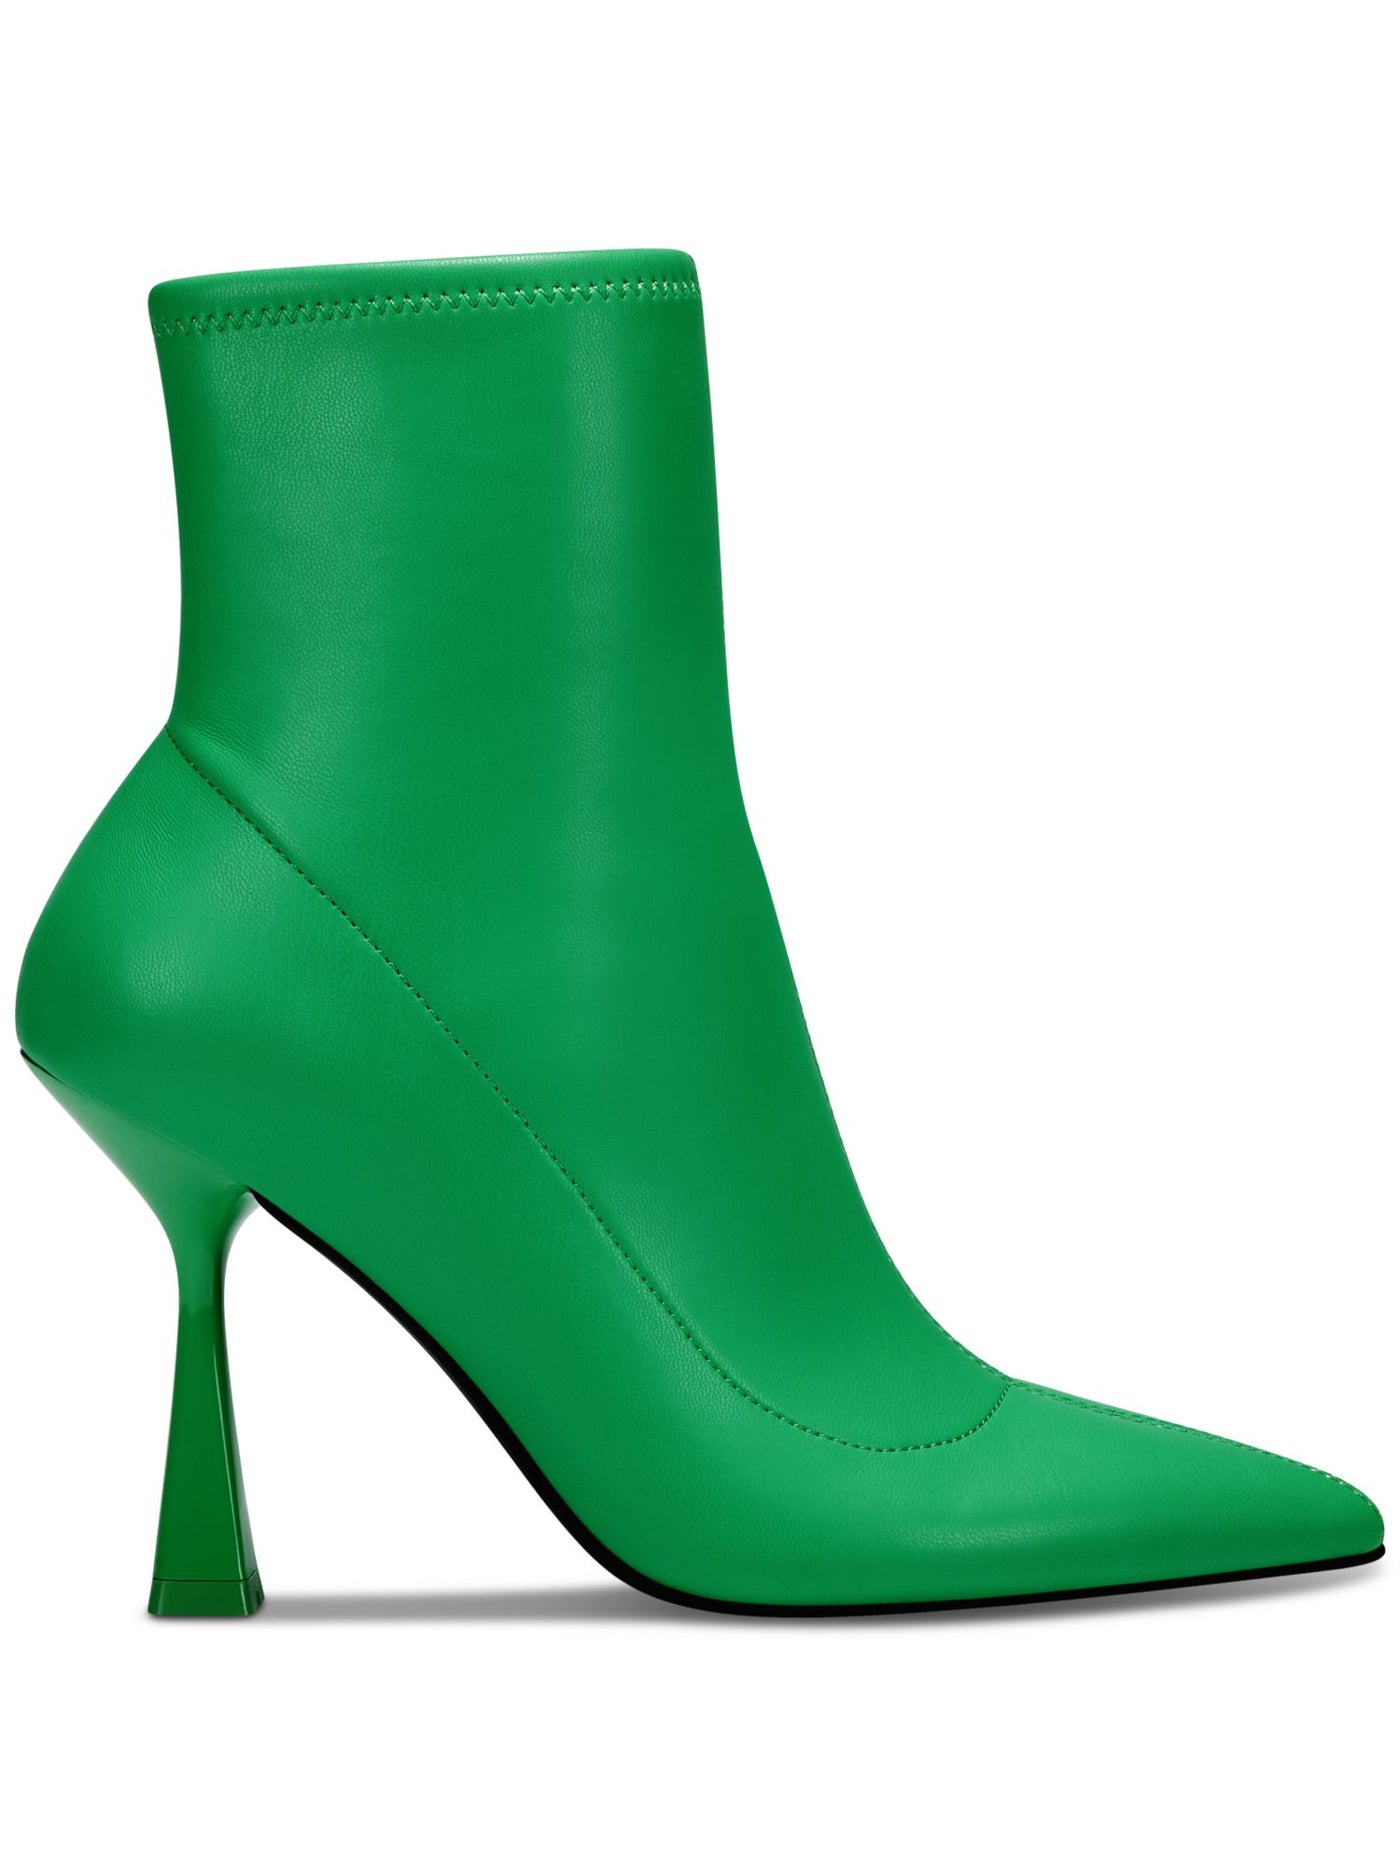 BAR III Womens Green Stretch Comfort Olevia Pointed Toe Flare Zip-Up Booties 9 M